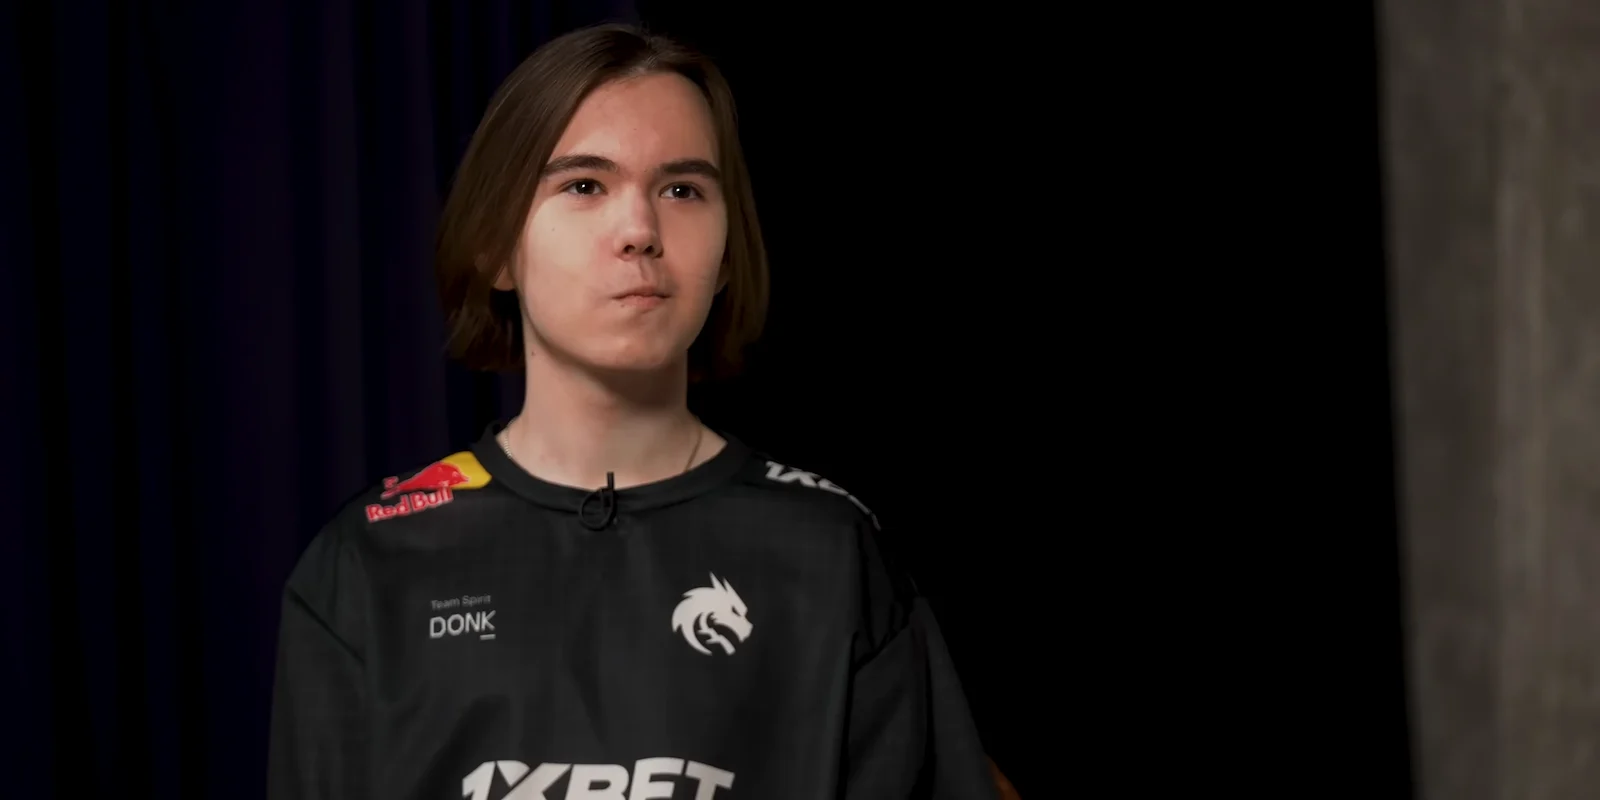 Team Spirit has unearthed yet another CIS prodigy just in time for CS2